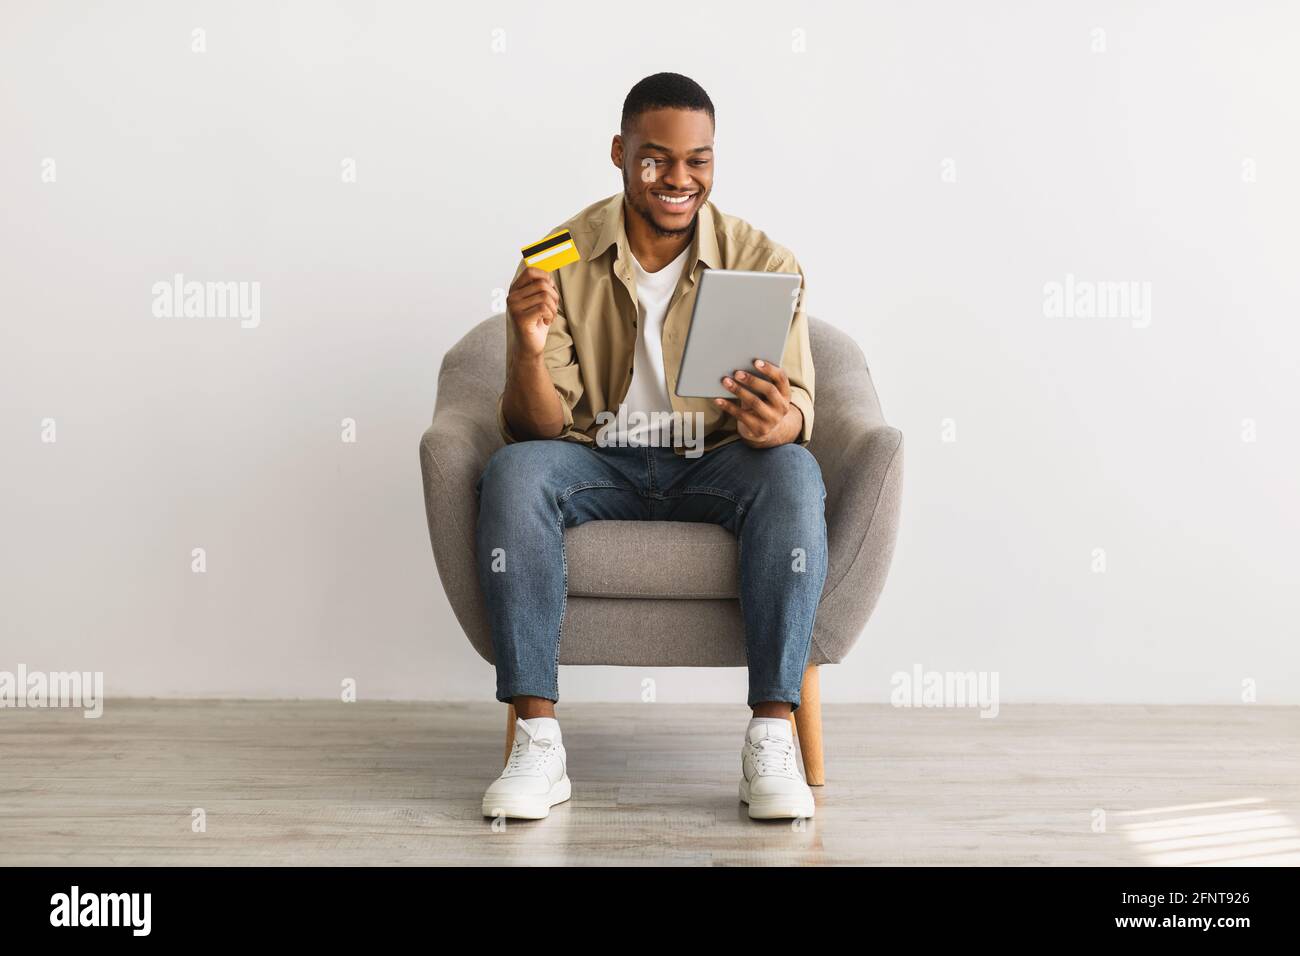 Man Using Tablet And Credit Card Shopping Online, Gray Background Stock Photo